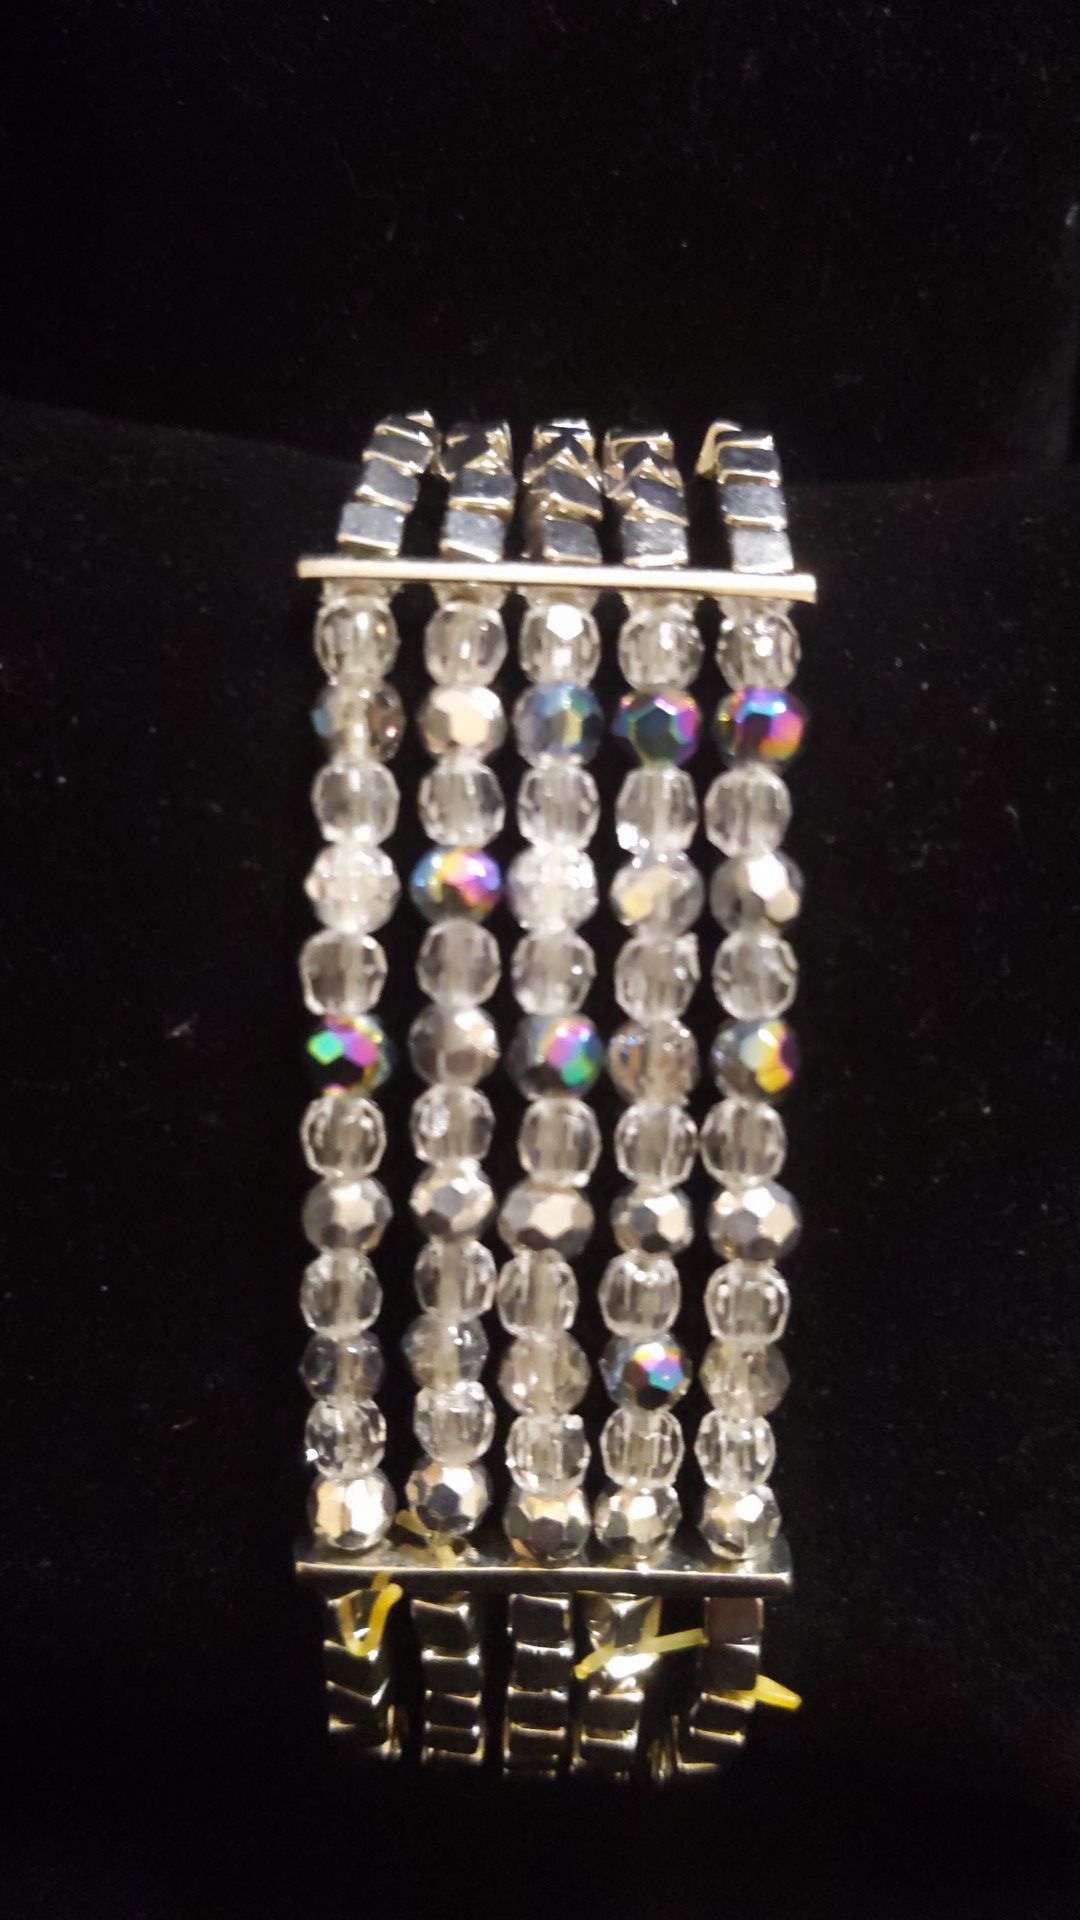 New Cookie Lee stretch bracelet silver and crystals stunning original tag $36